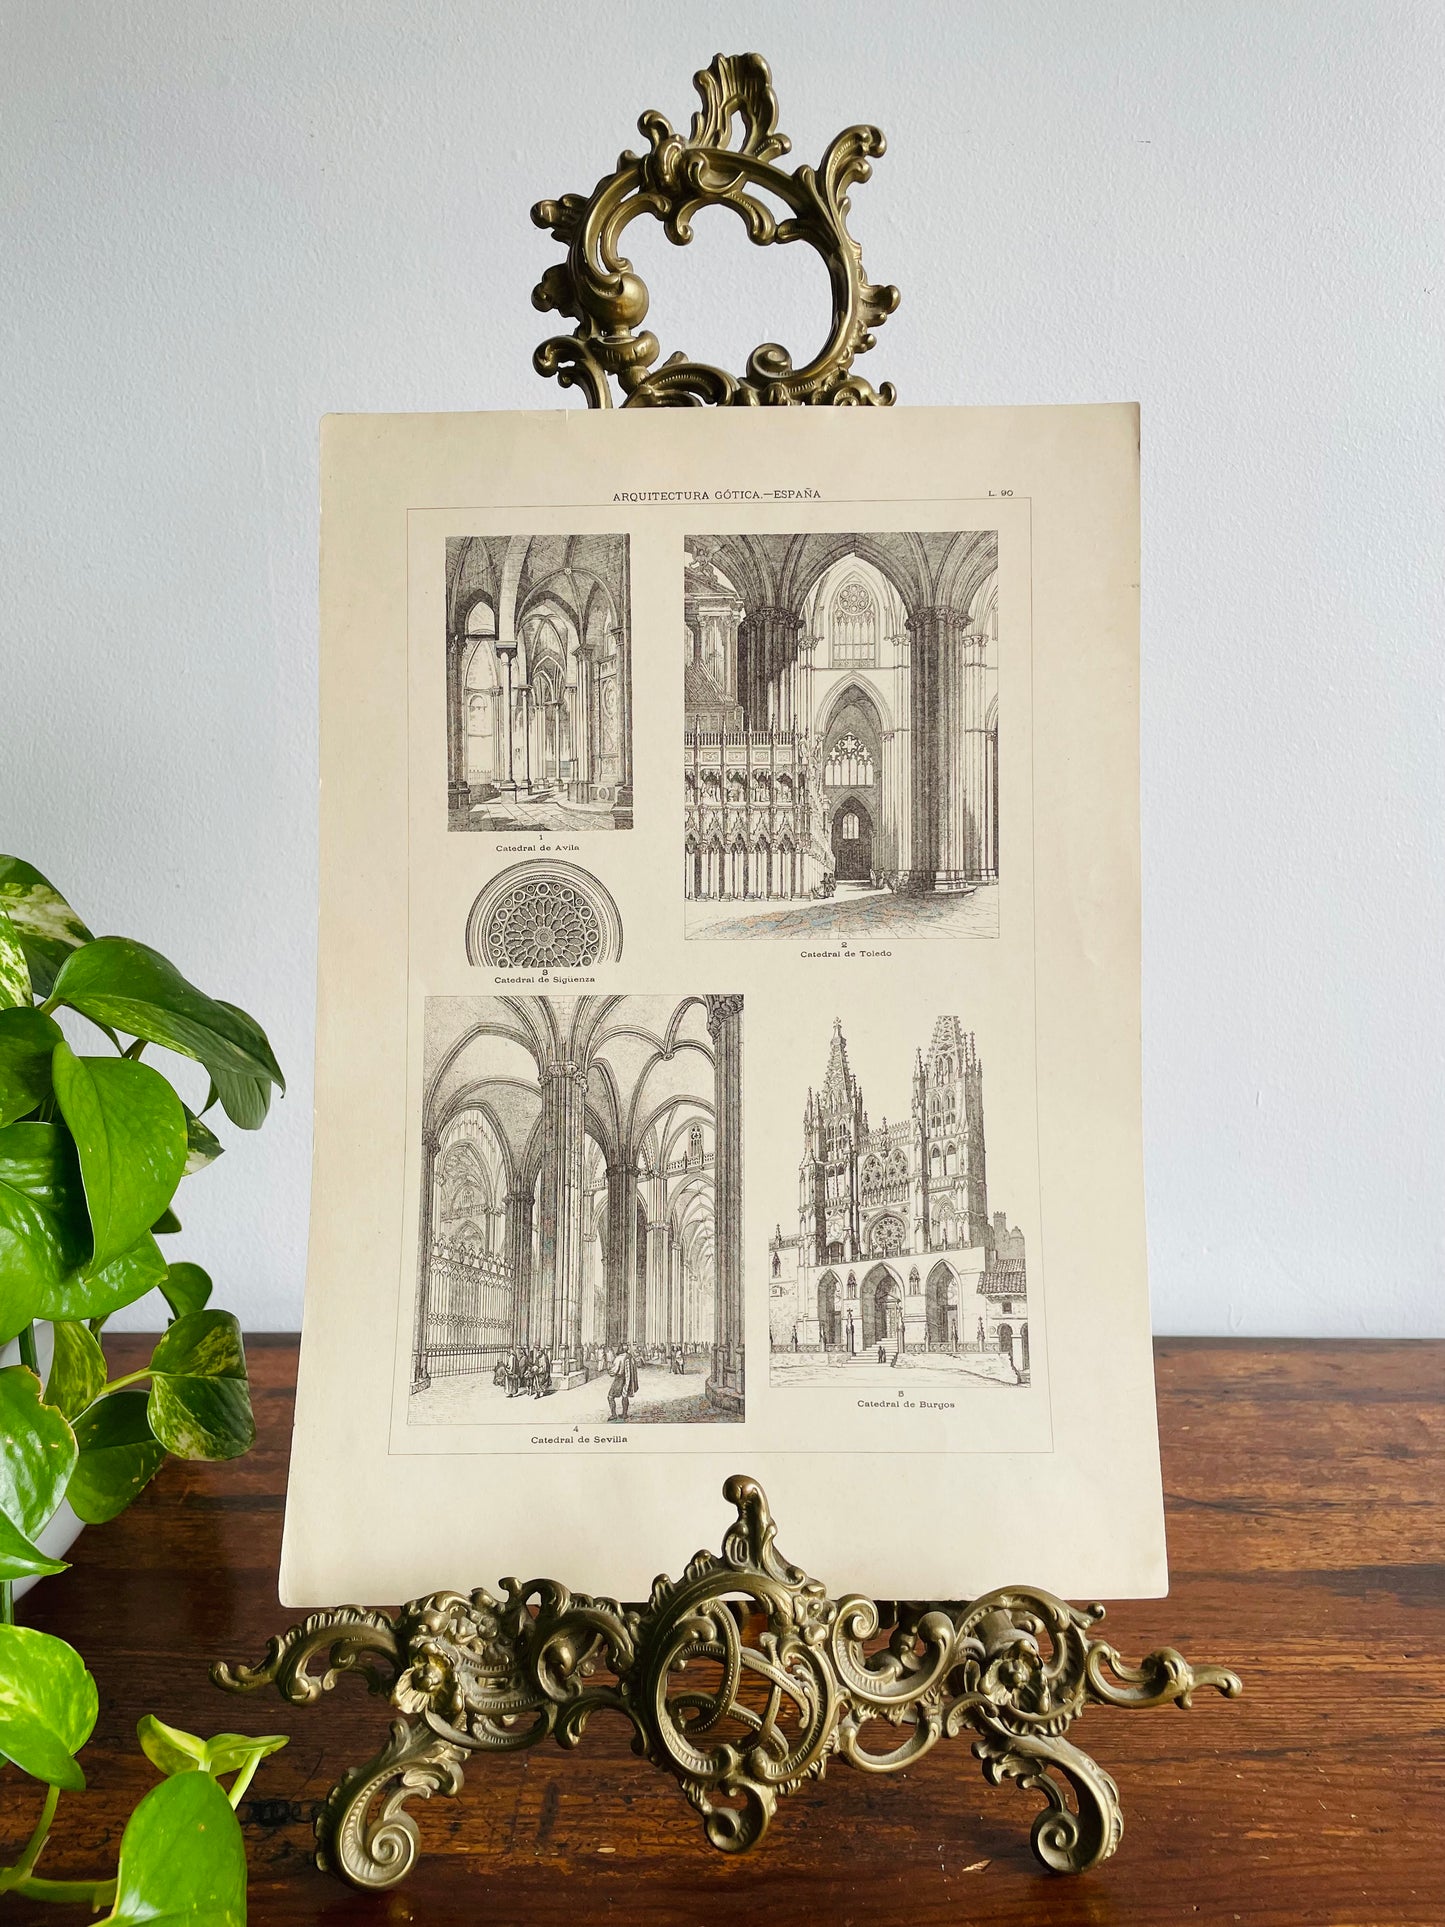 Gothic Architecture of Spain Page Print from Book # 2 - Found in Lisbon, Portugal